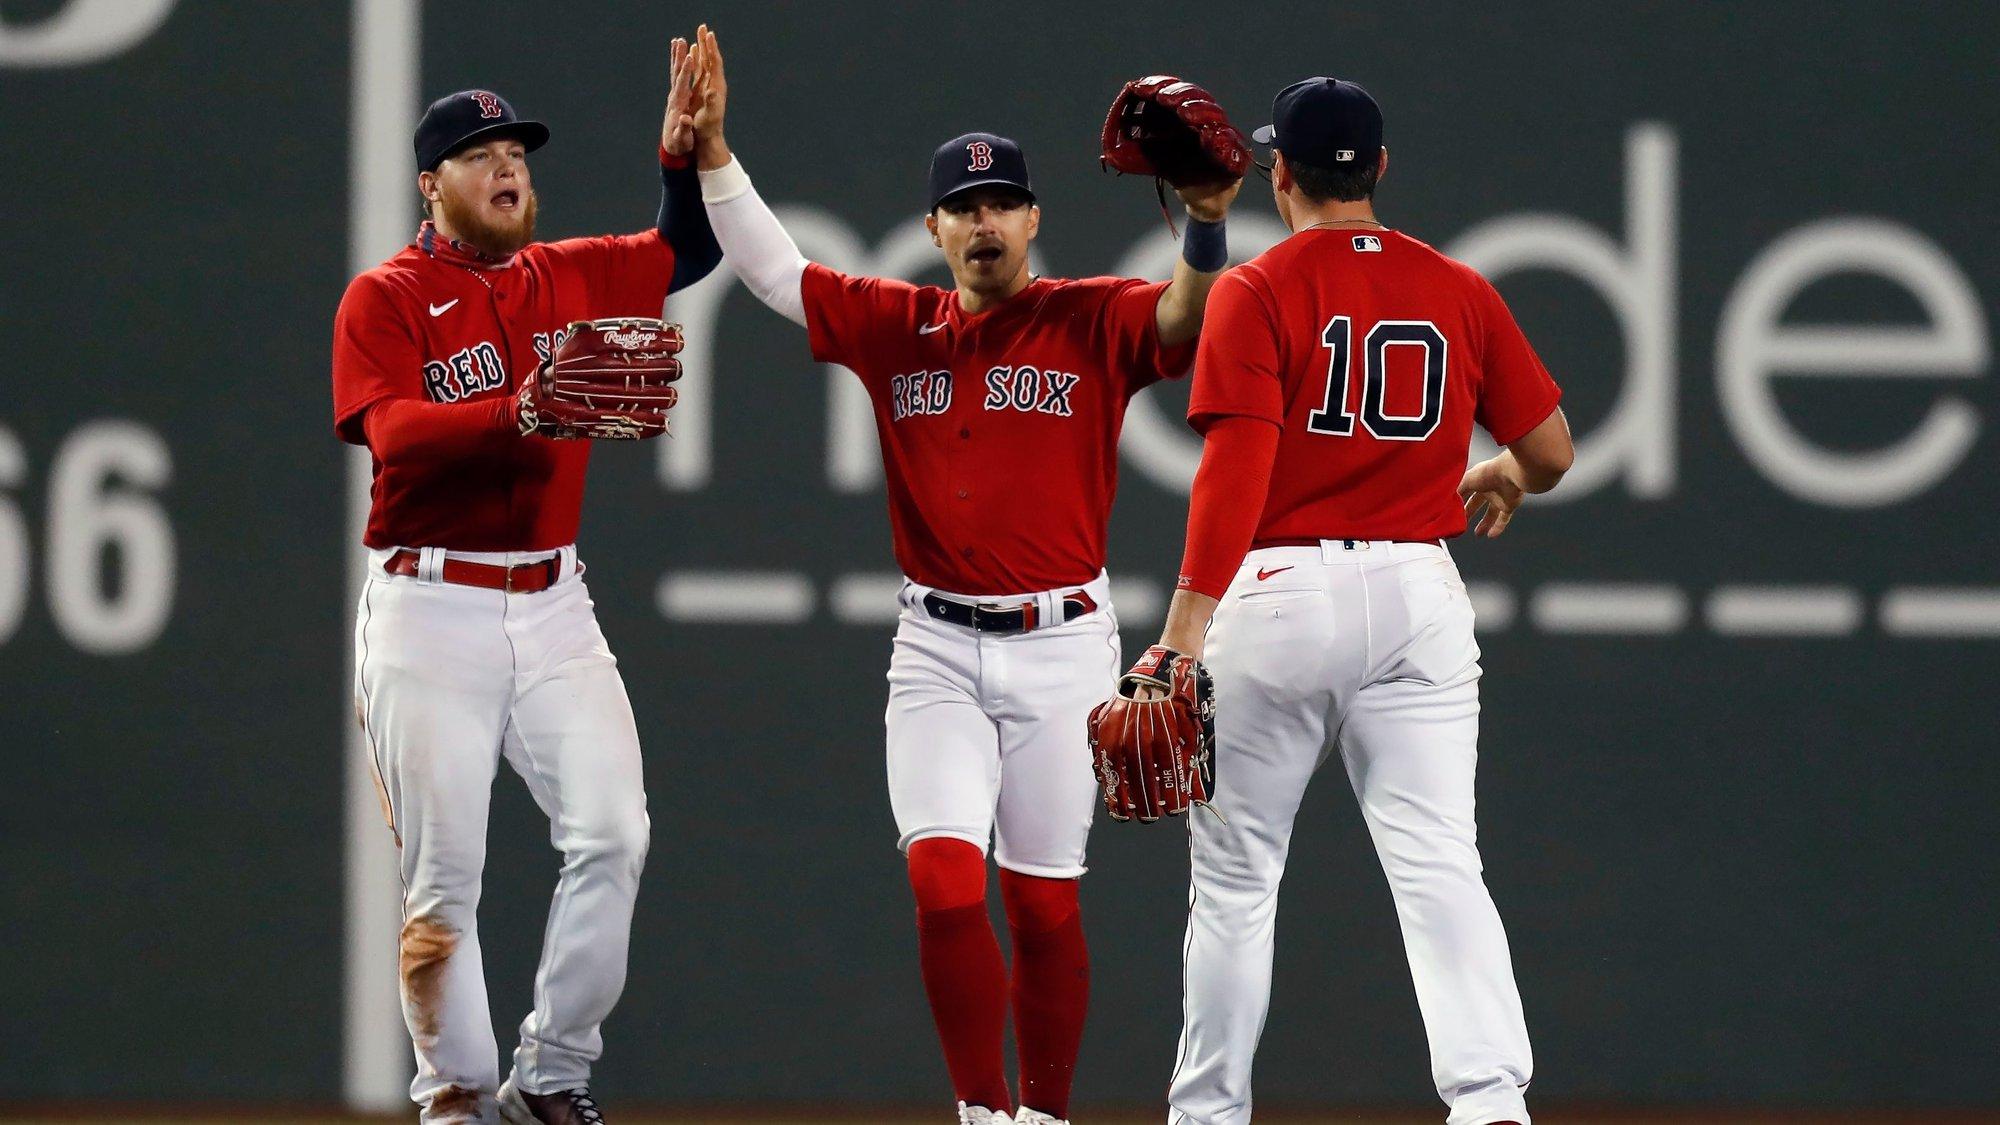 Boston Red Sox vs. Los Angeles Angels Preview (July 5): All-Stars and Mega Star on Display in L.A.